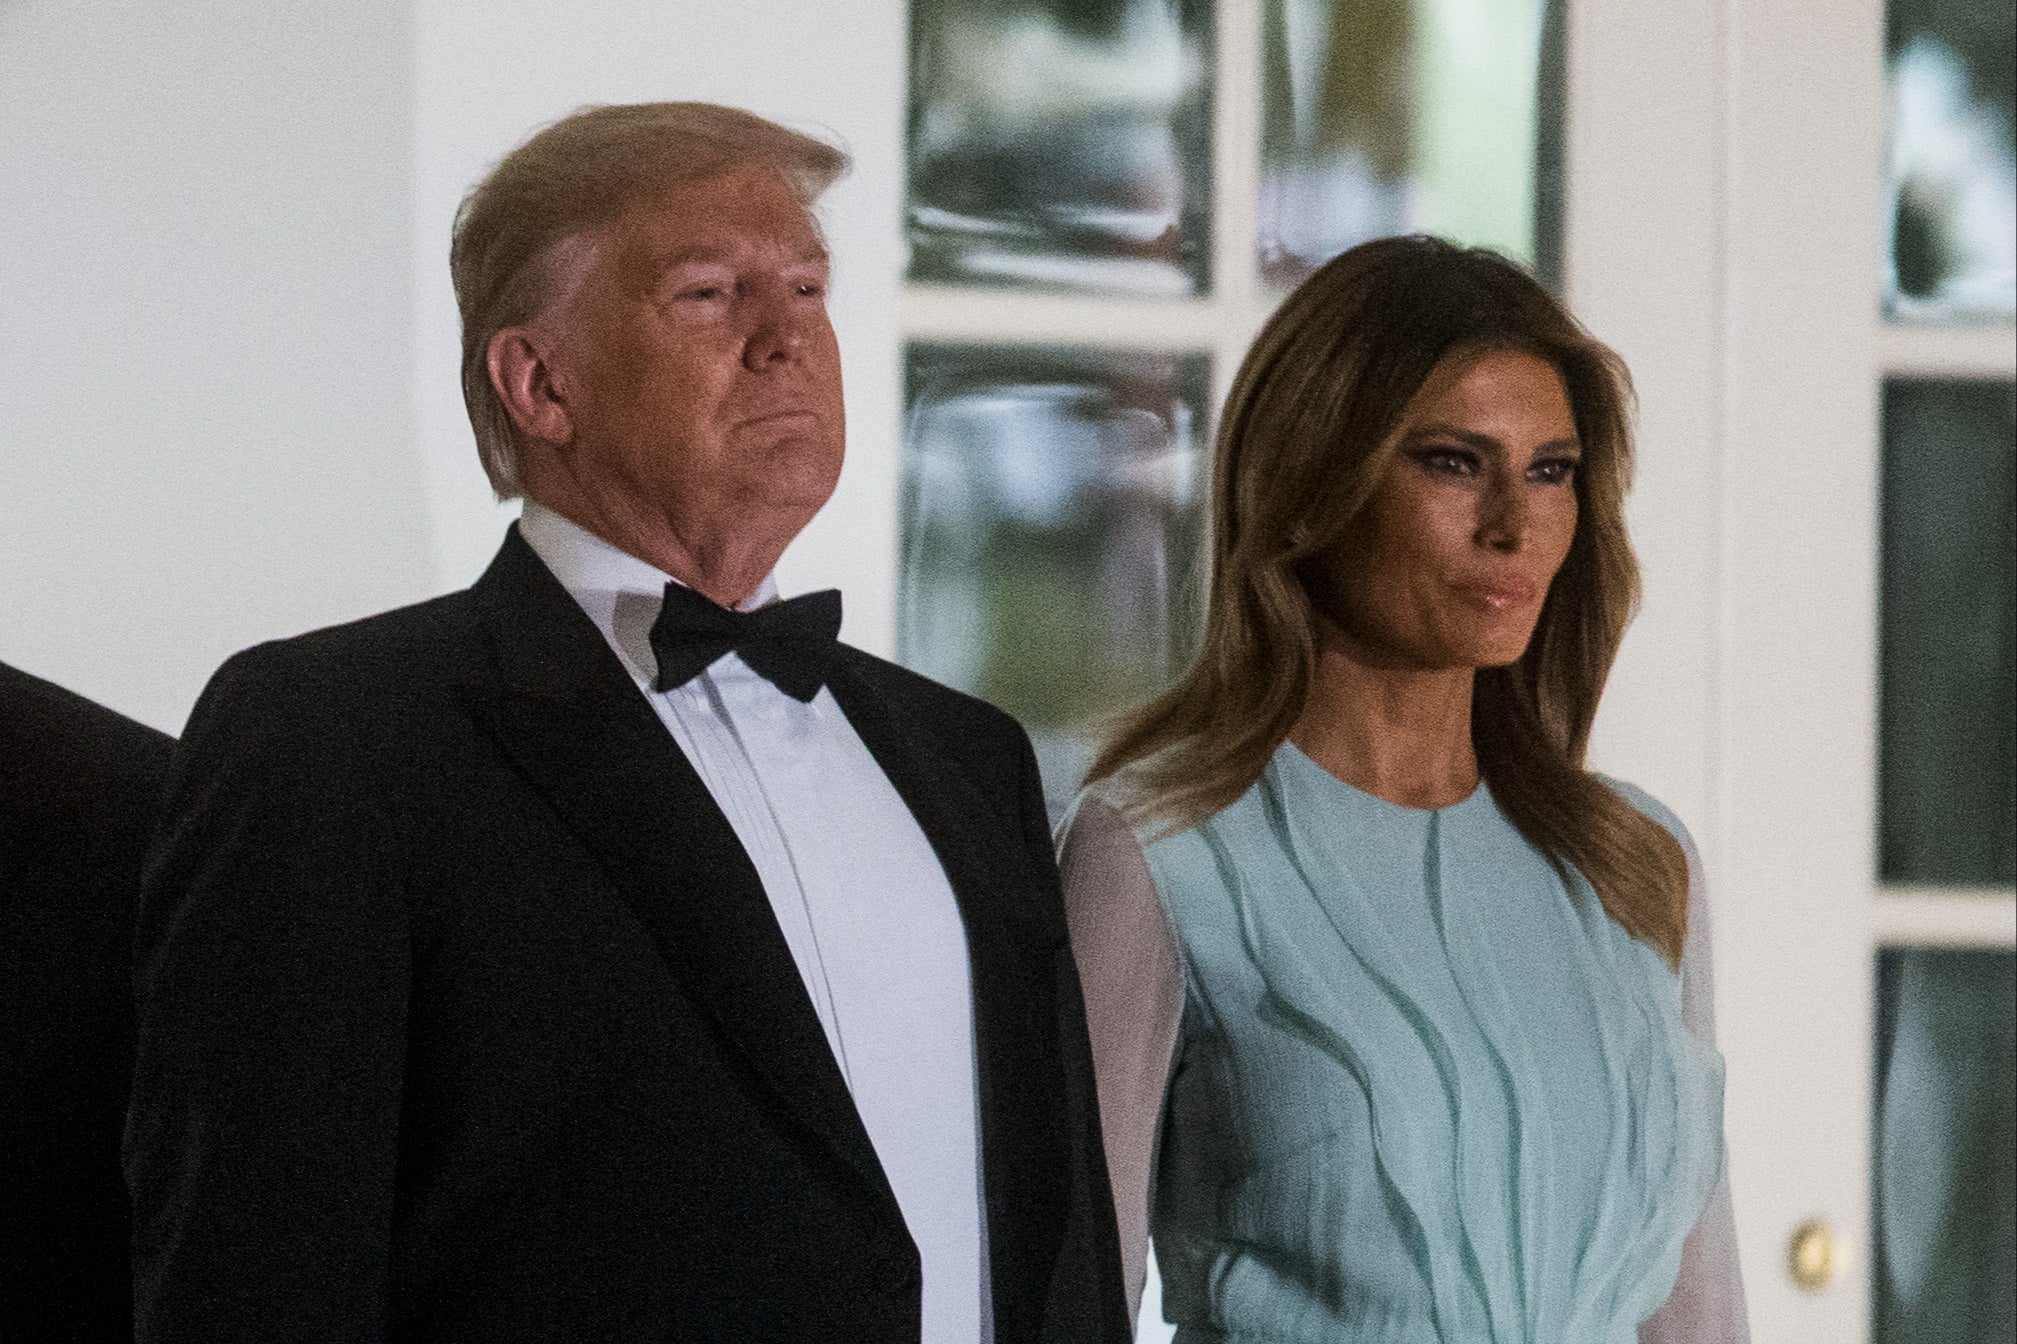 Donald and Melania Trump attended a state dinner at the White House on September 20, 2019. On Saturday night they will both be at a gala at the home of John Paulson